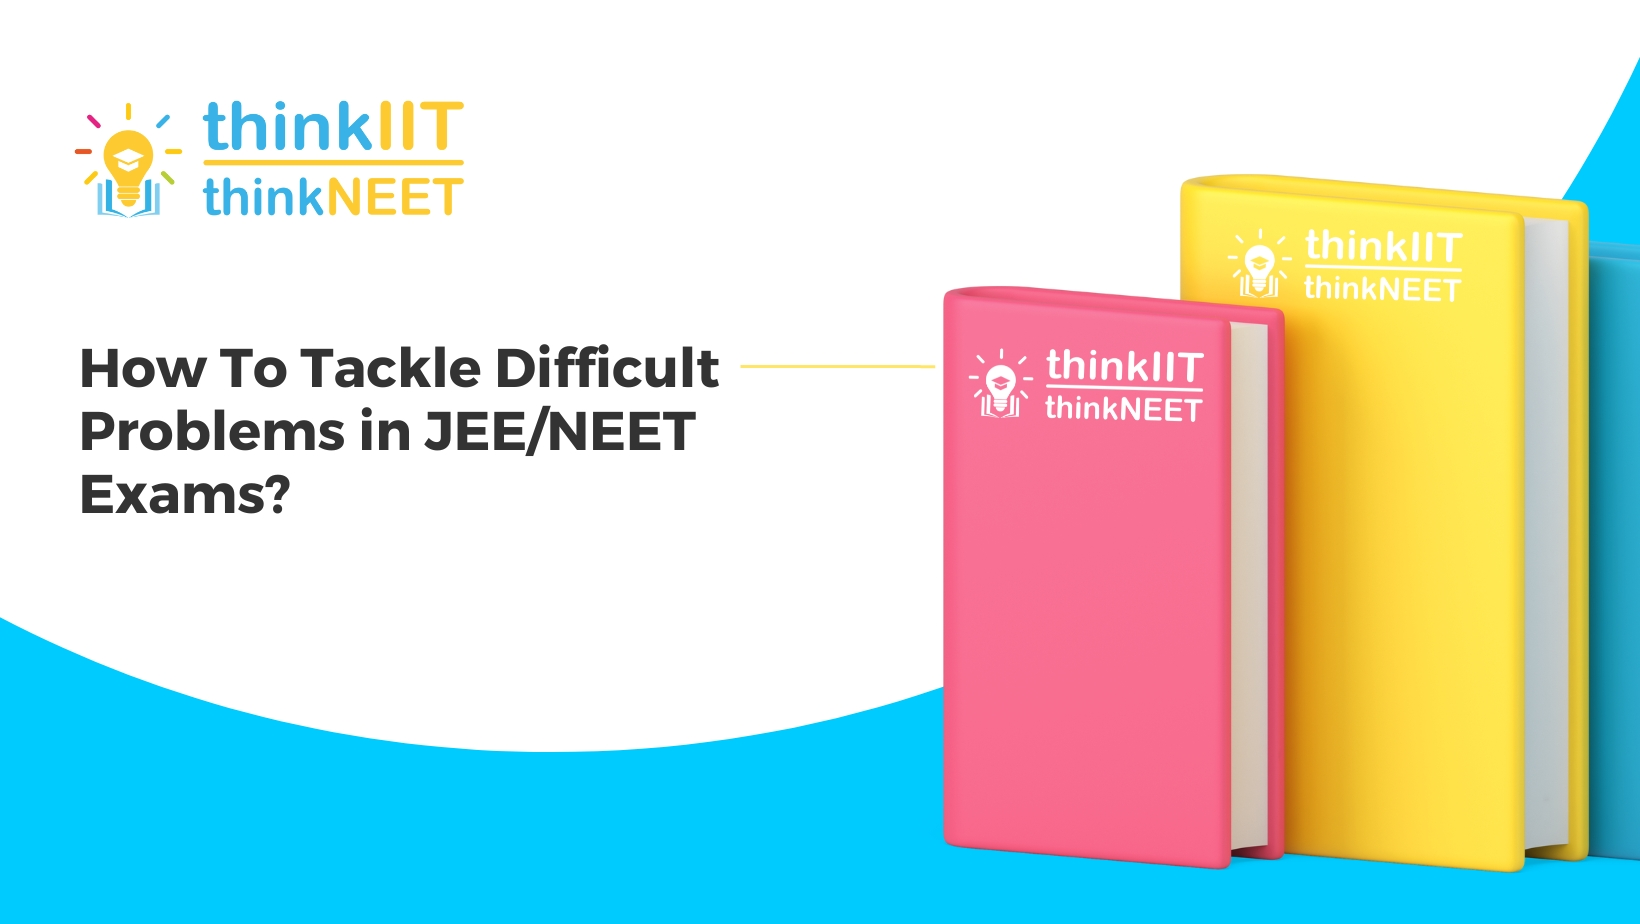 How to Tackle Difficult Problems in JEE/NEET Exams